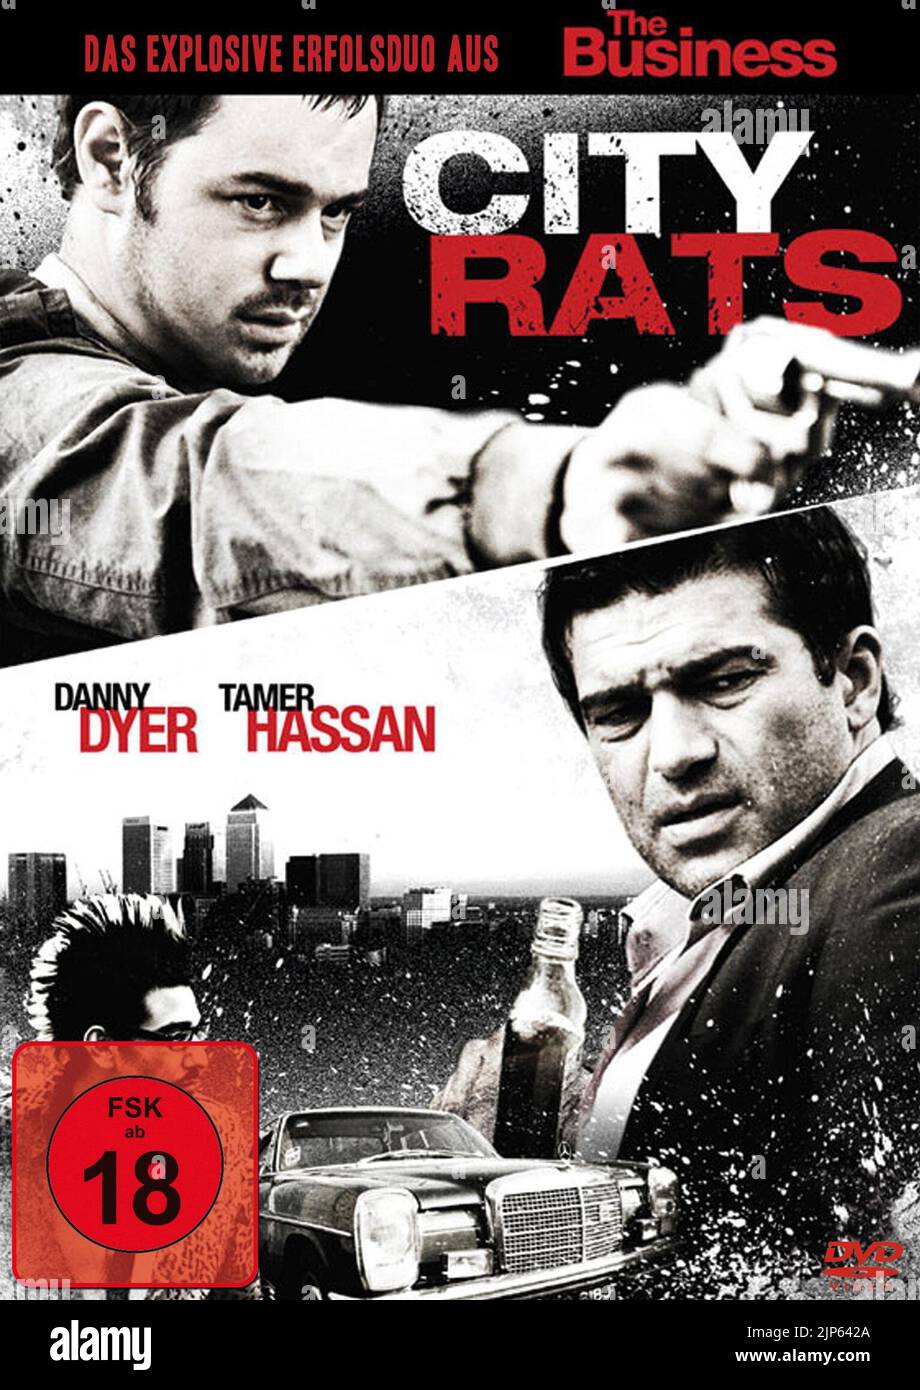 DANNY DYER, TAMER HASSAN POSTER, CITY RATS, 2009 Stock Photo